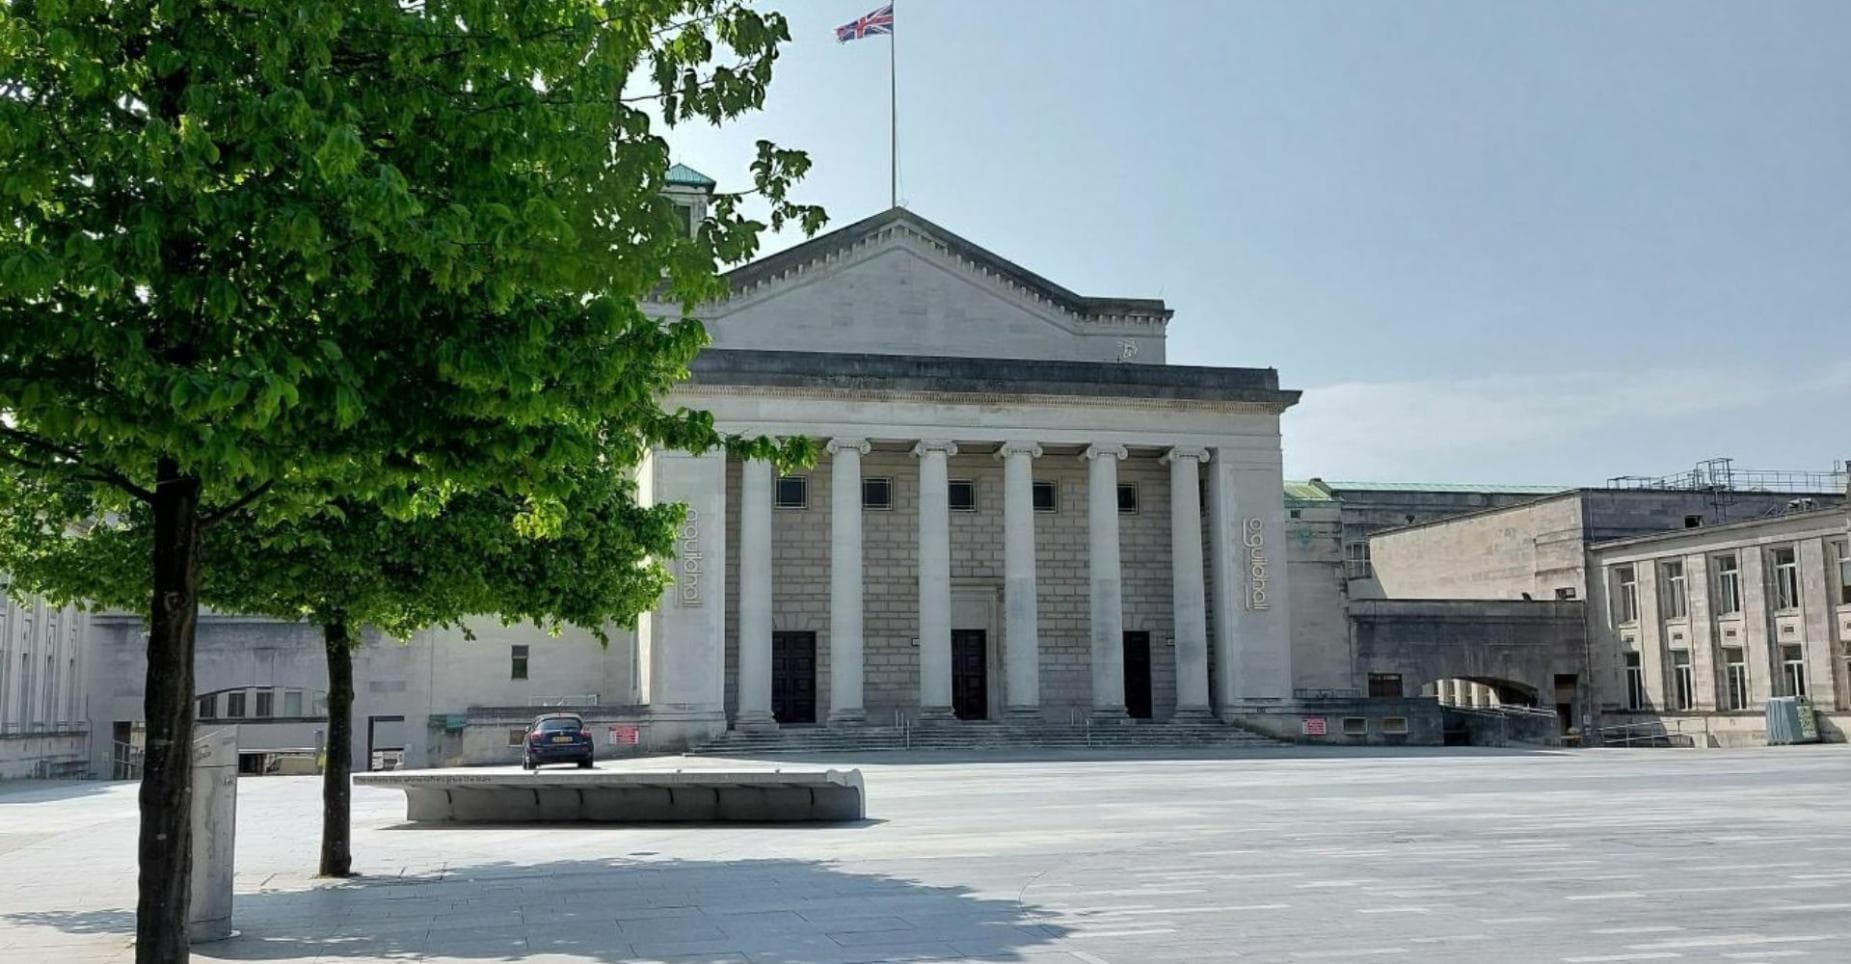 Guildhall Square in Southampton's Cultural Quarter